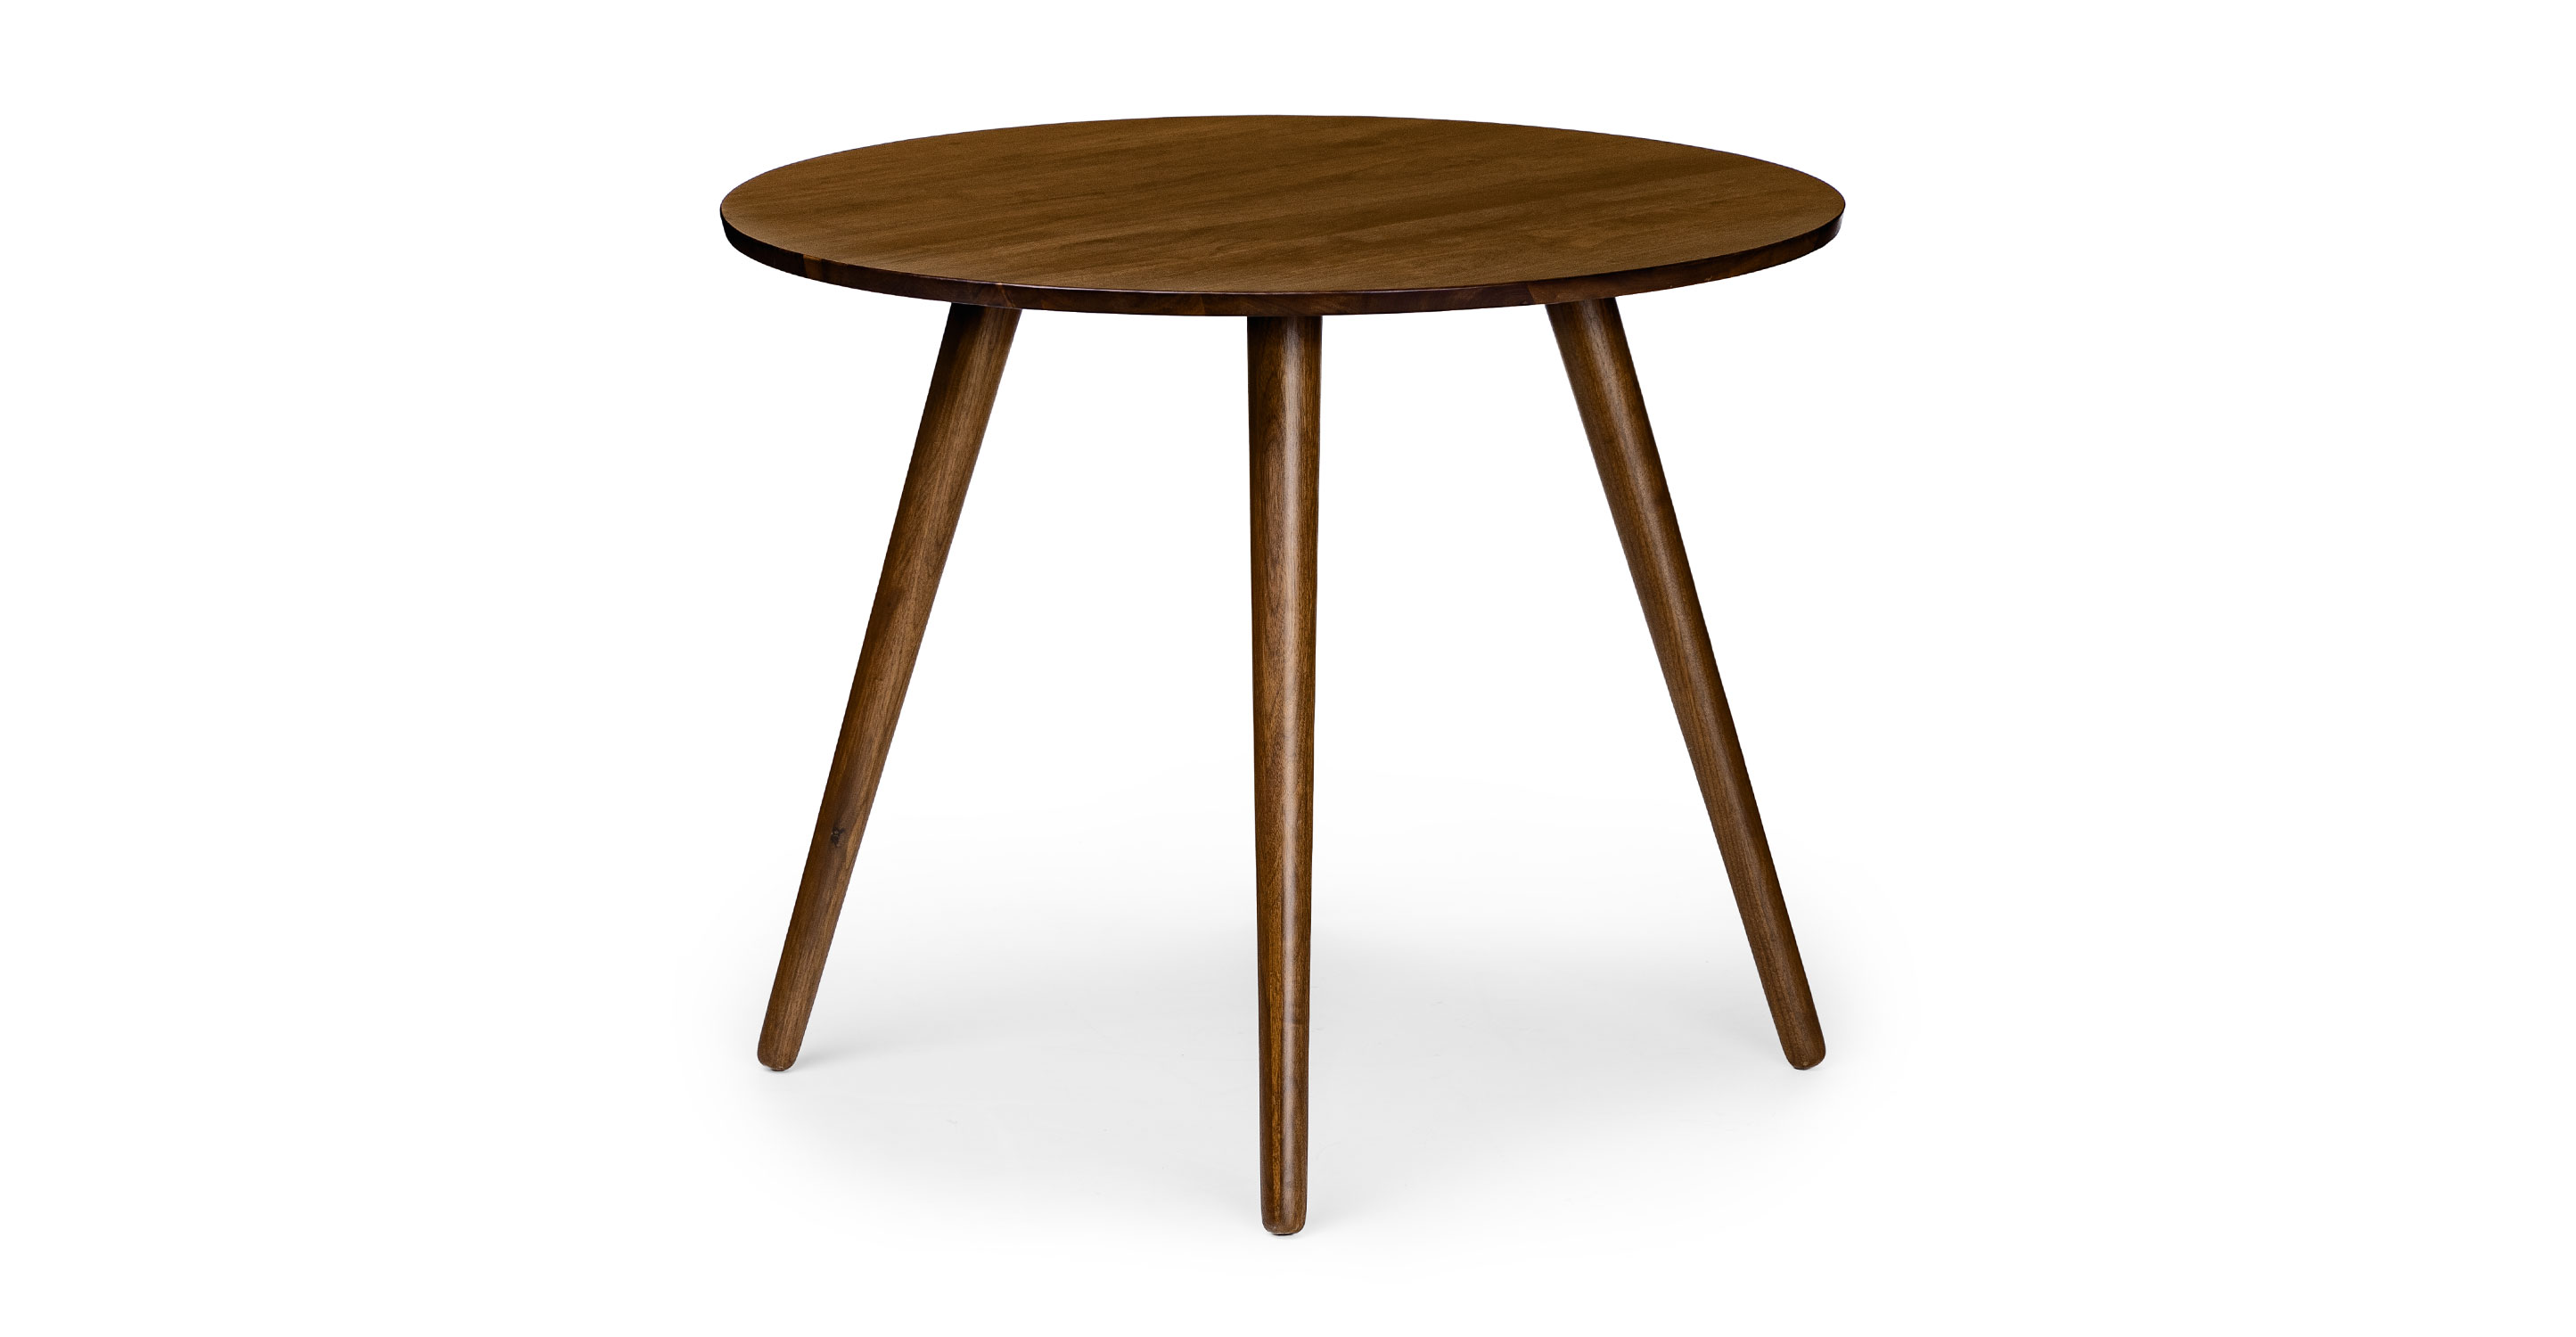 Round Walnut Wood Dining Table For 3, 36 Round Dining Table And Chairs